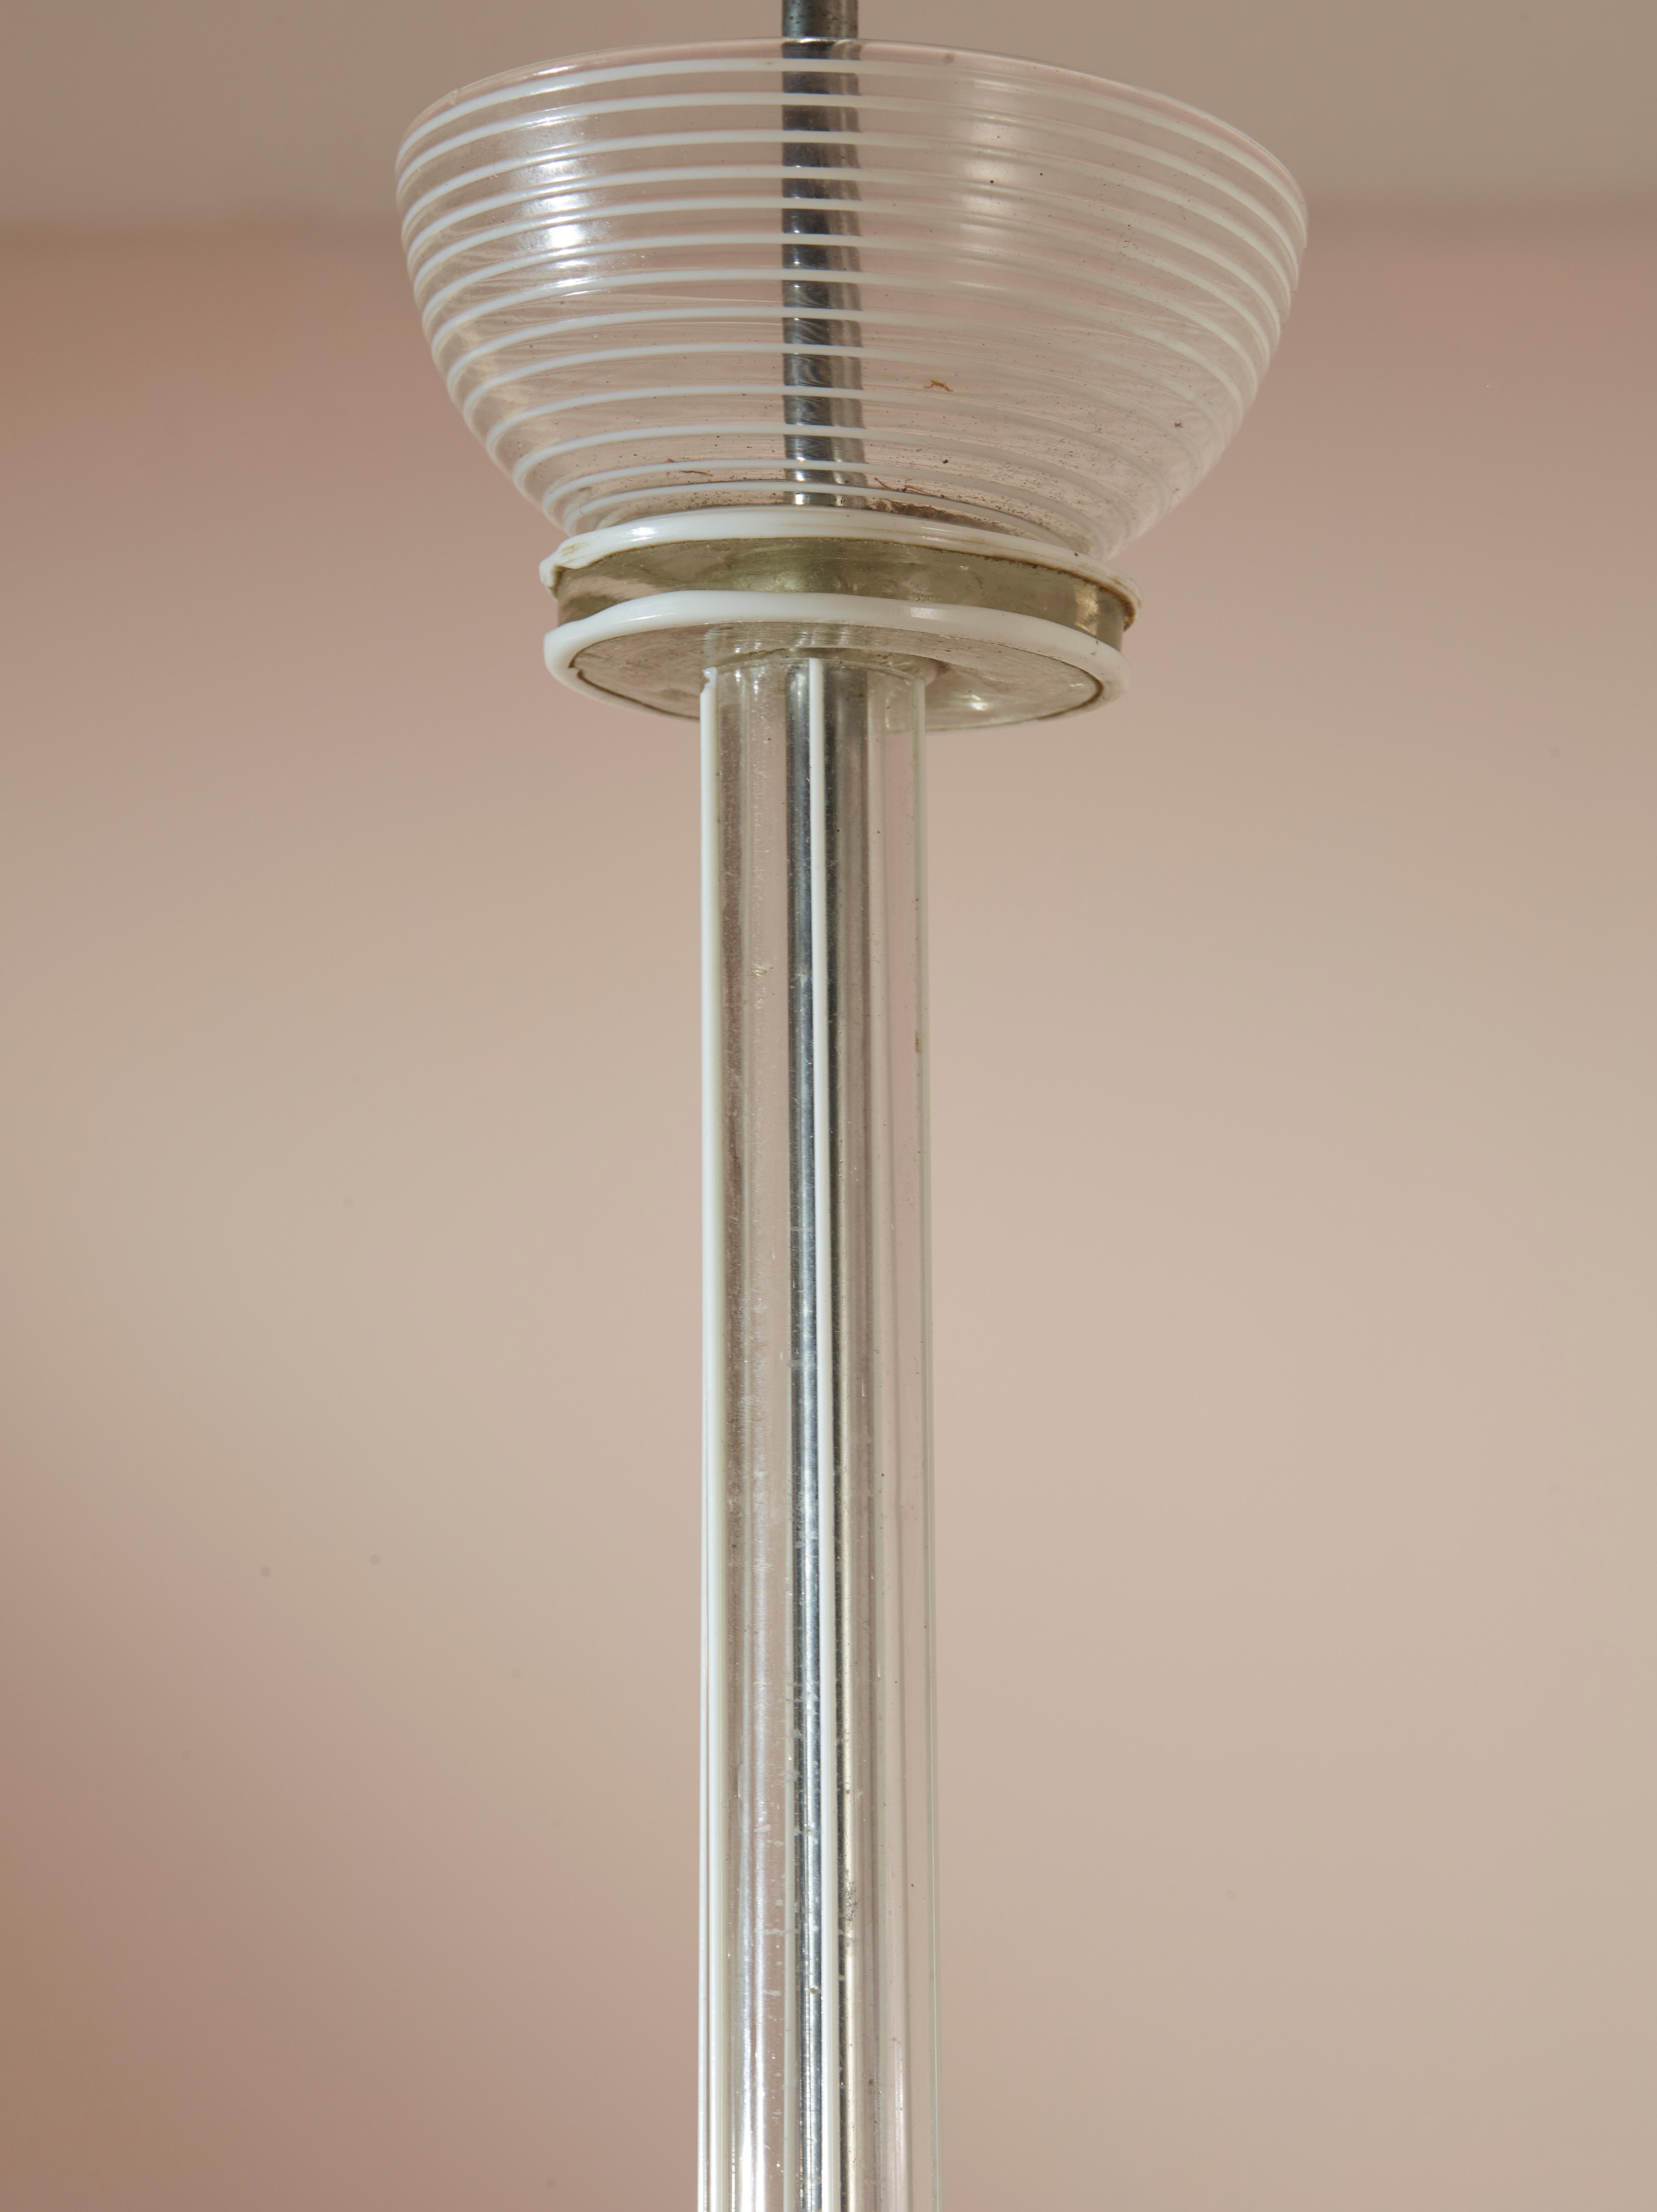 Murano Rationalist Chandelier with Filigrana and Lattimo Glass, Italy, 1930s For Sale 6